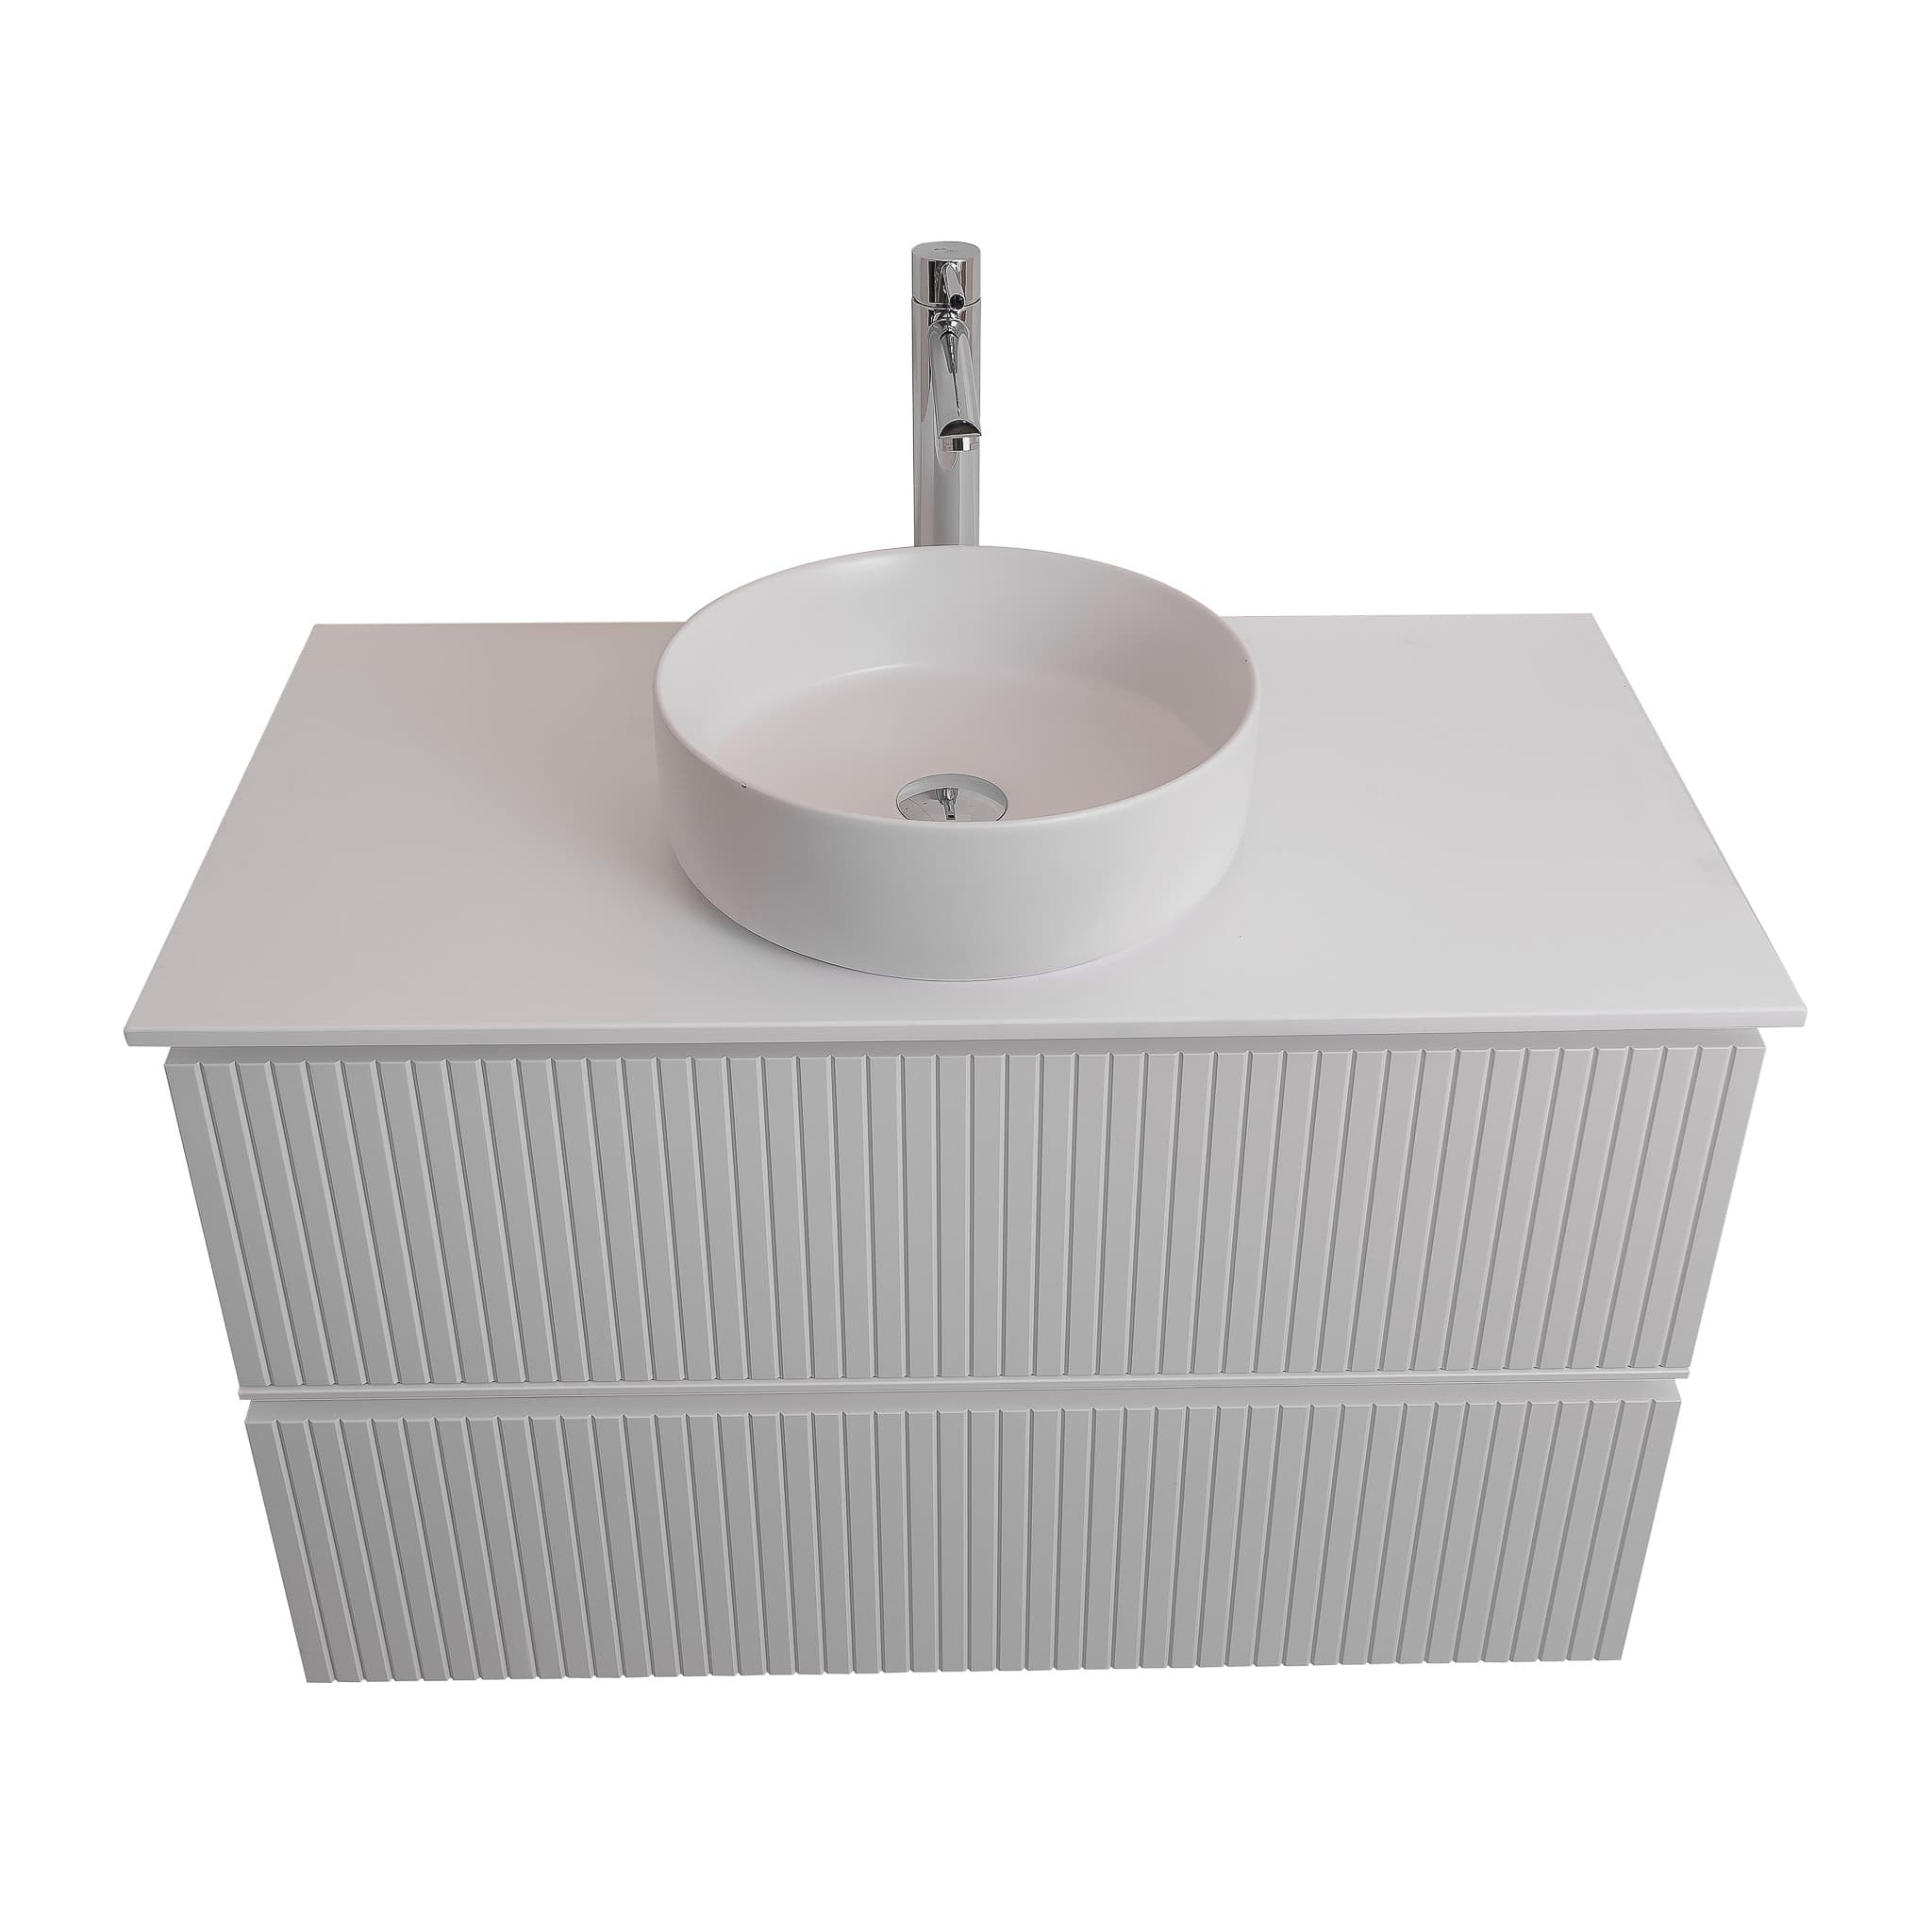 Ares 31.5 Matte White Cabinet, Ares White Top And Ares White Ceramic Basin, Wall Mounted Modern Vanity Set